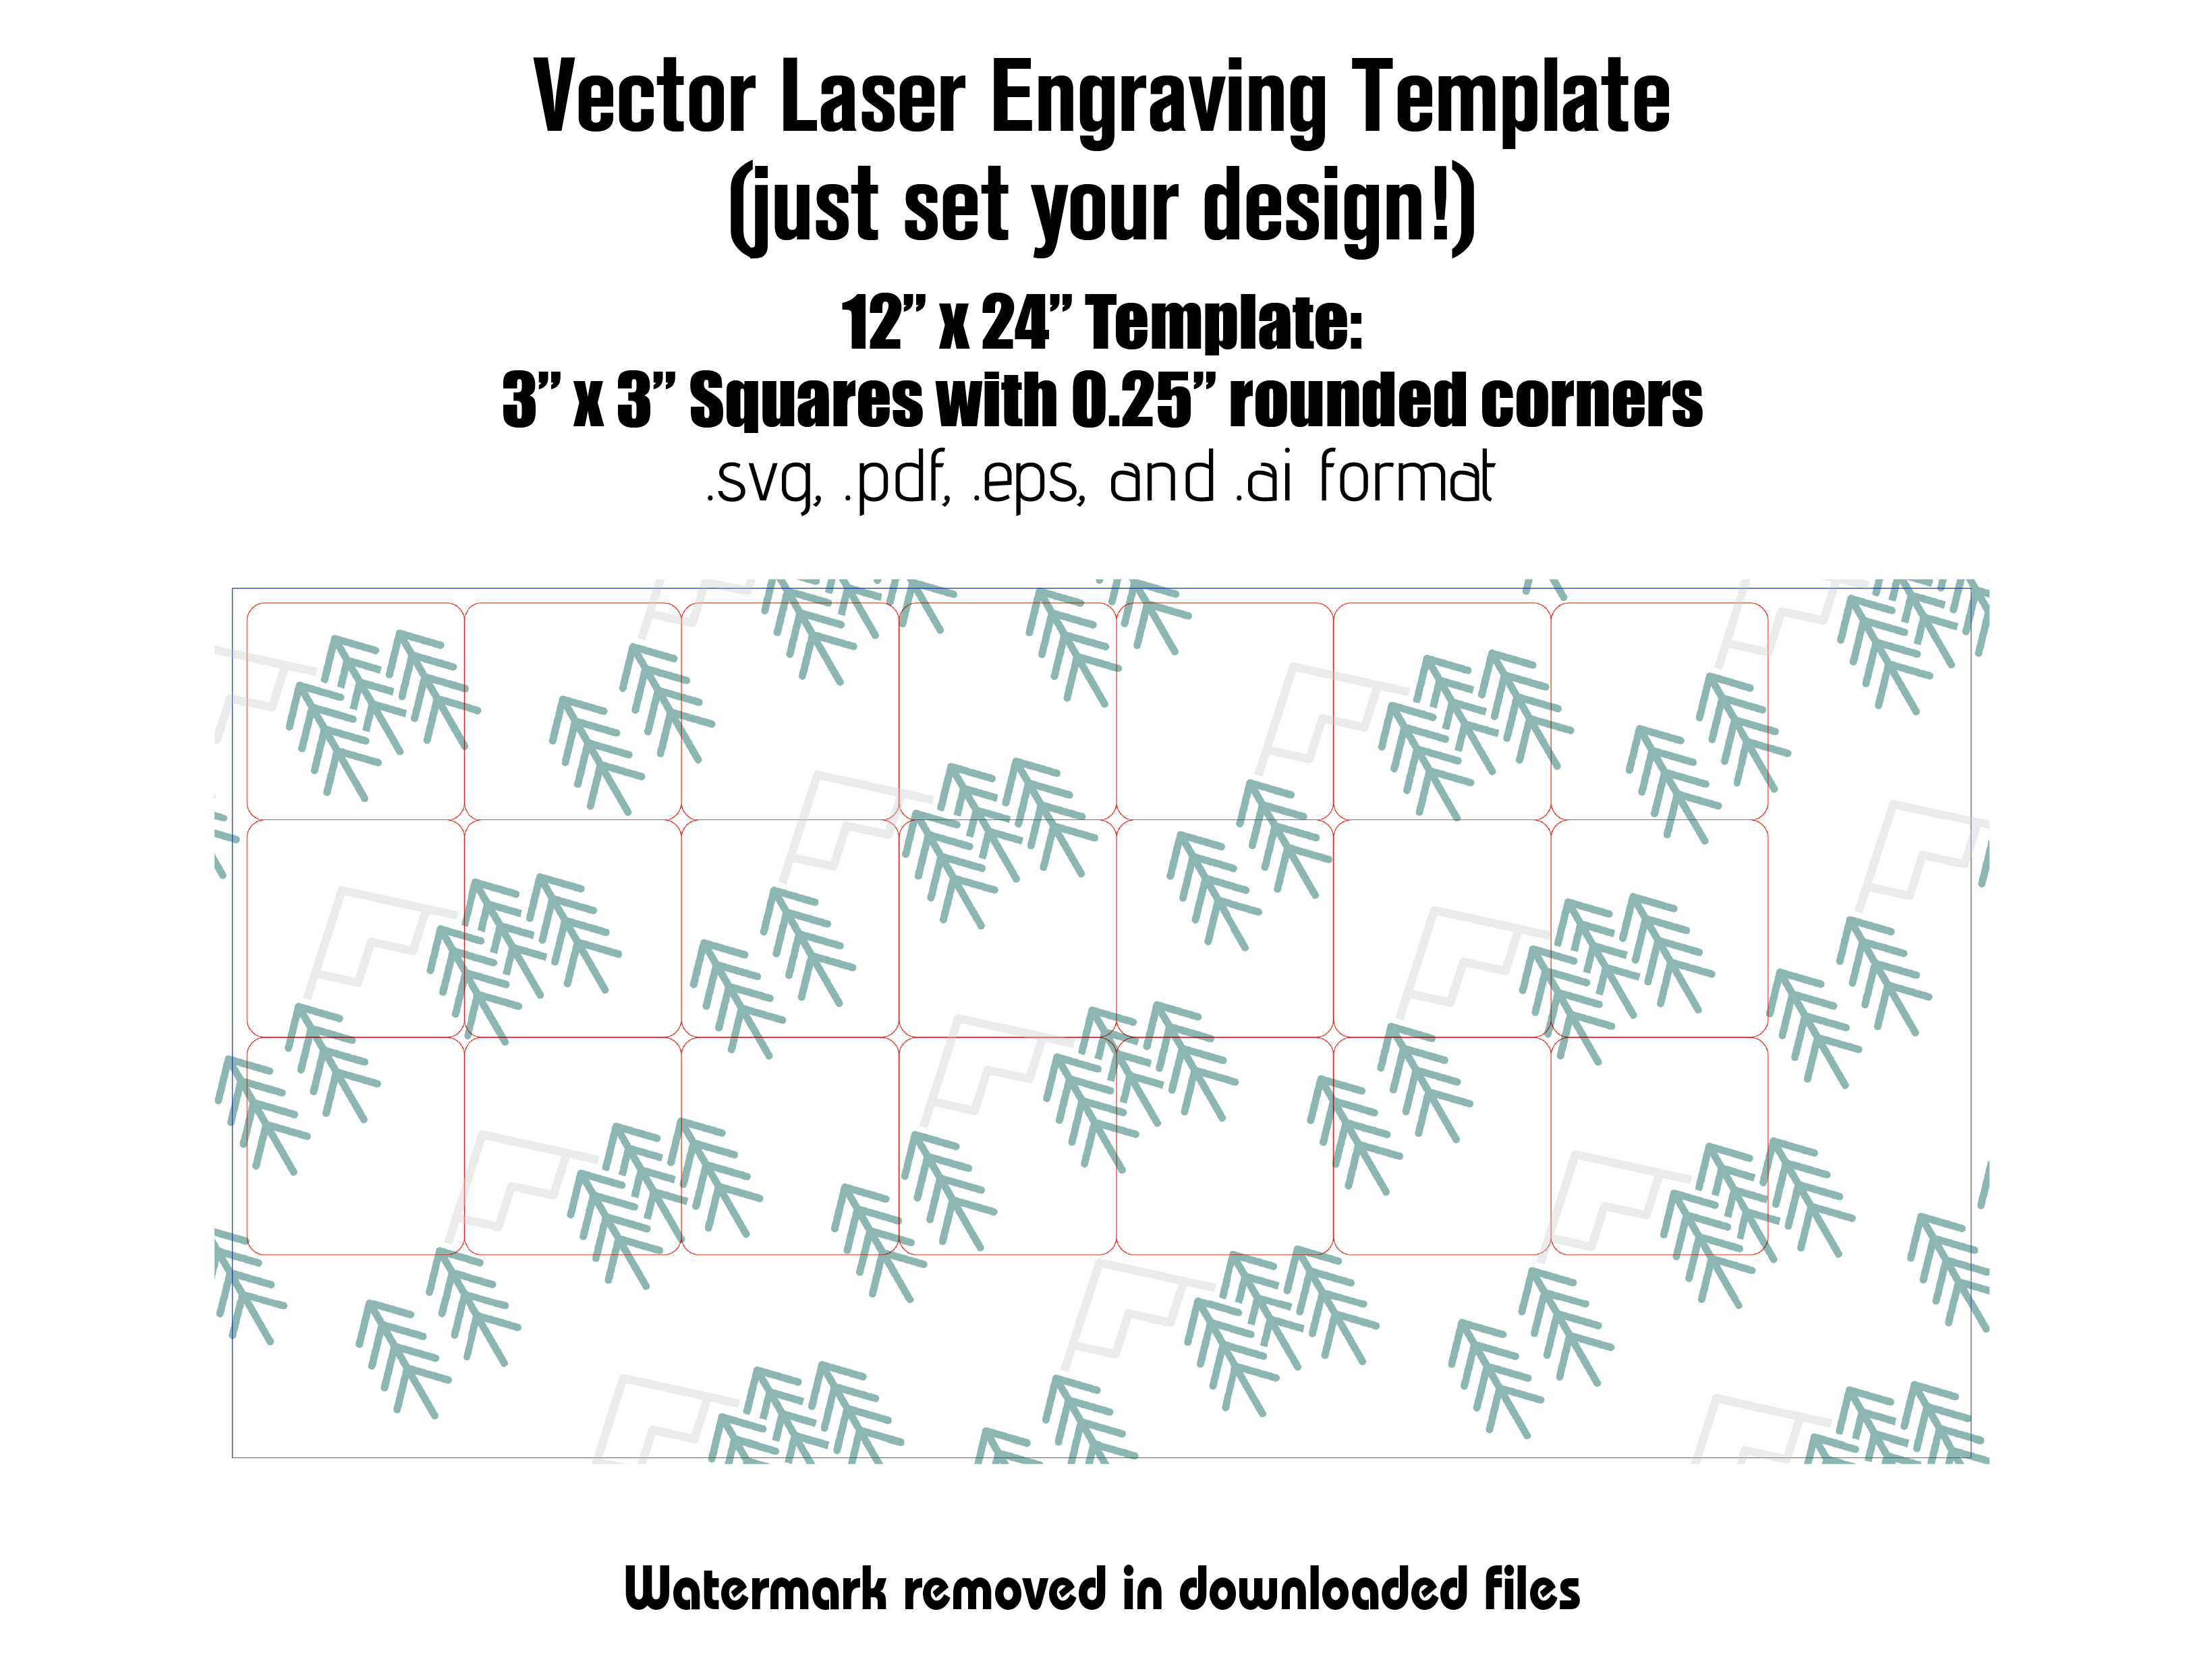 Digital Laser Cutting Template: 3" x 3" Rectangles w/Rounded Corners - 12" x 24" Sheet Size Digital Laser Engraving Files Craftworks NW 